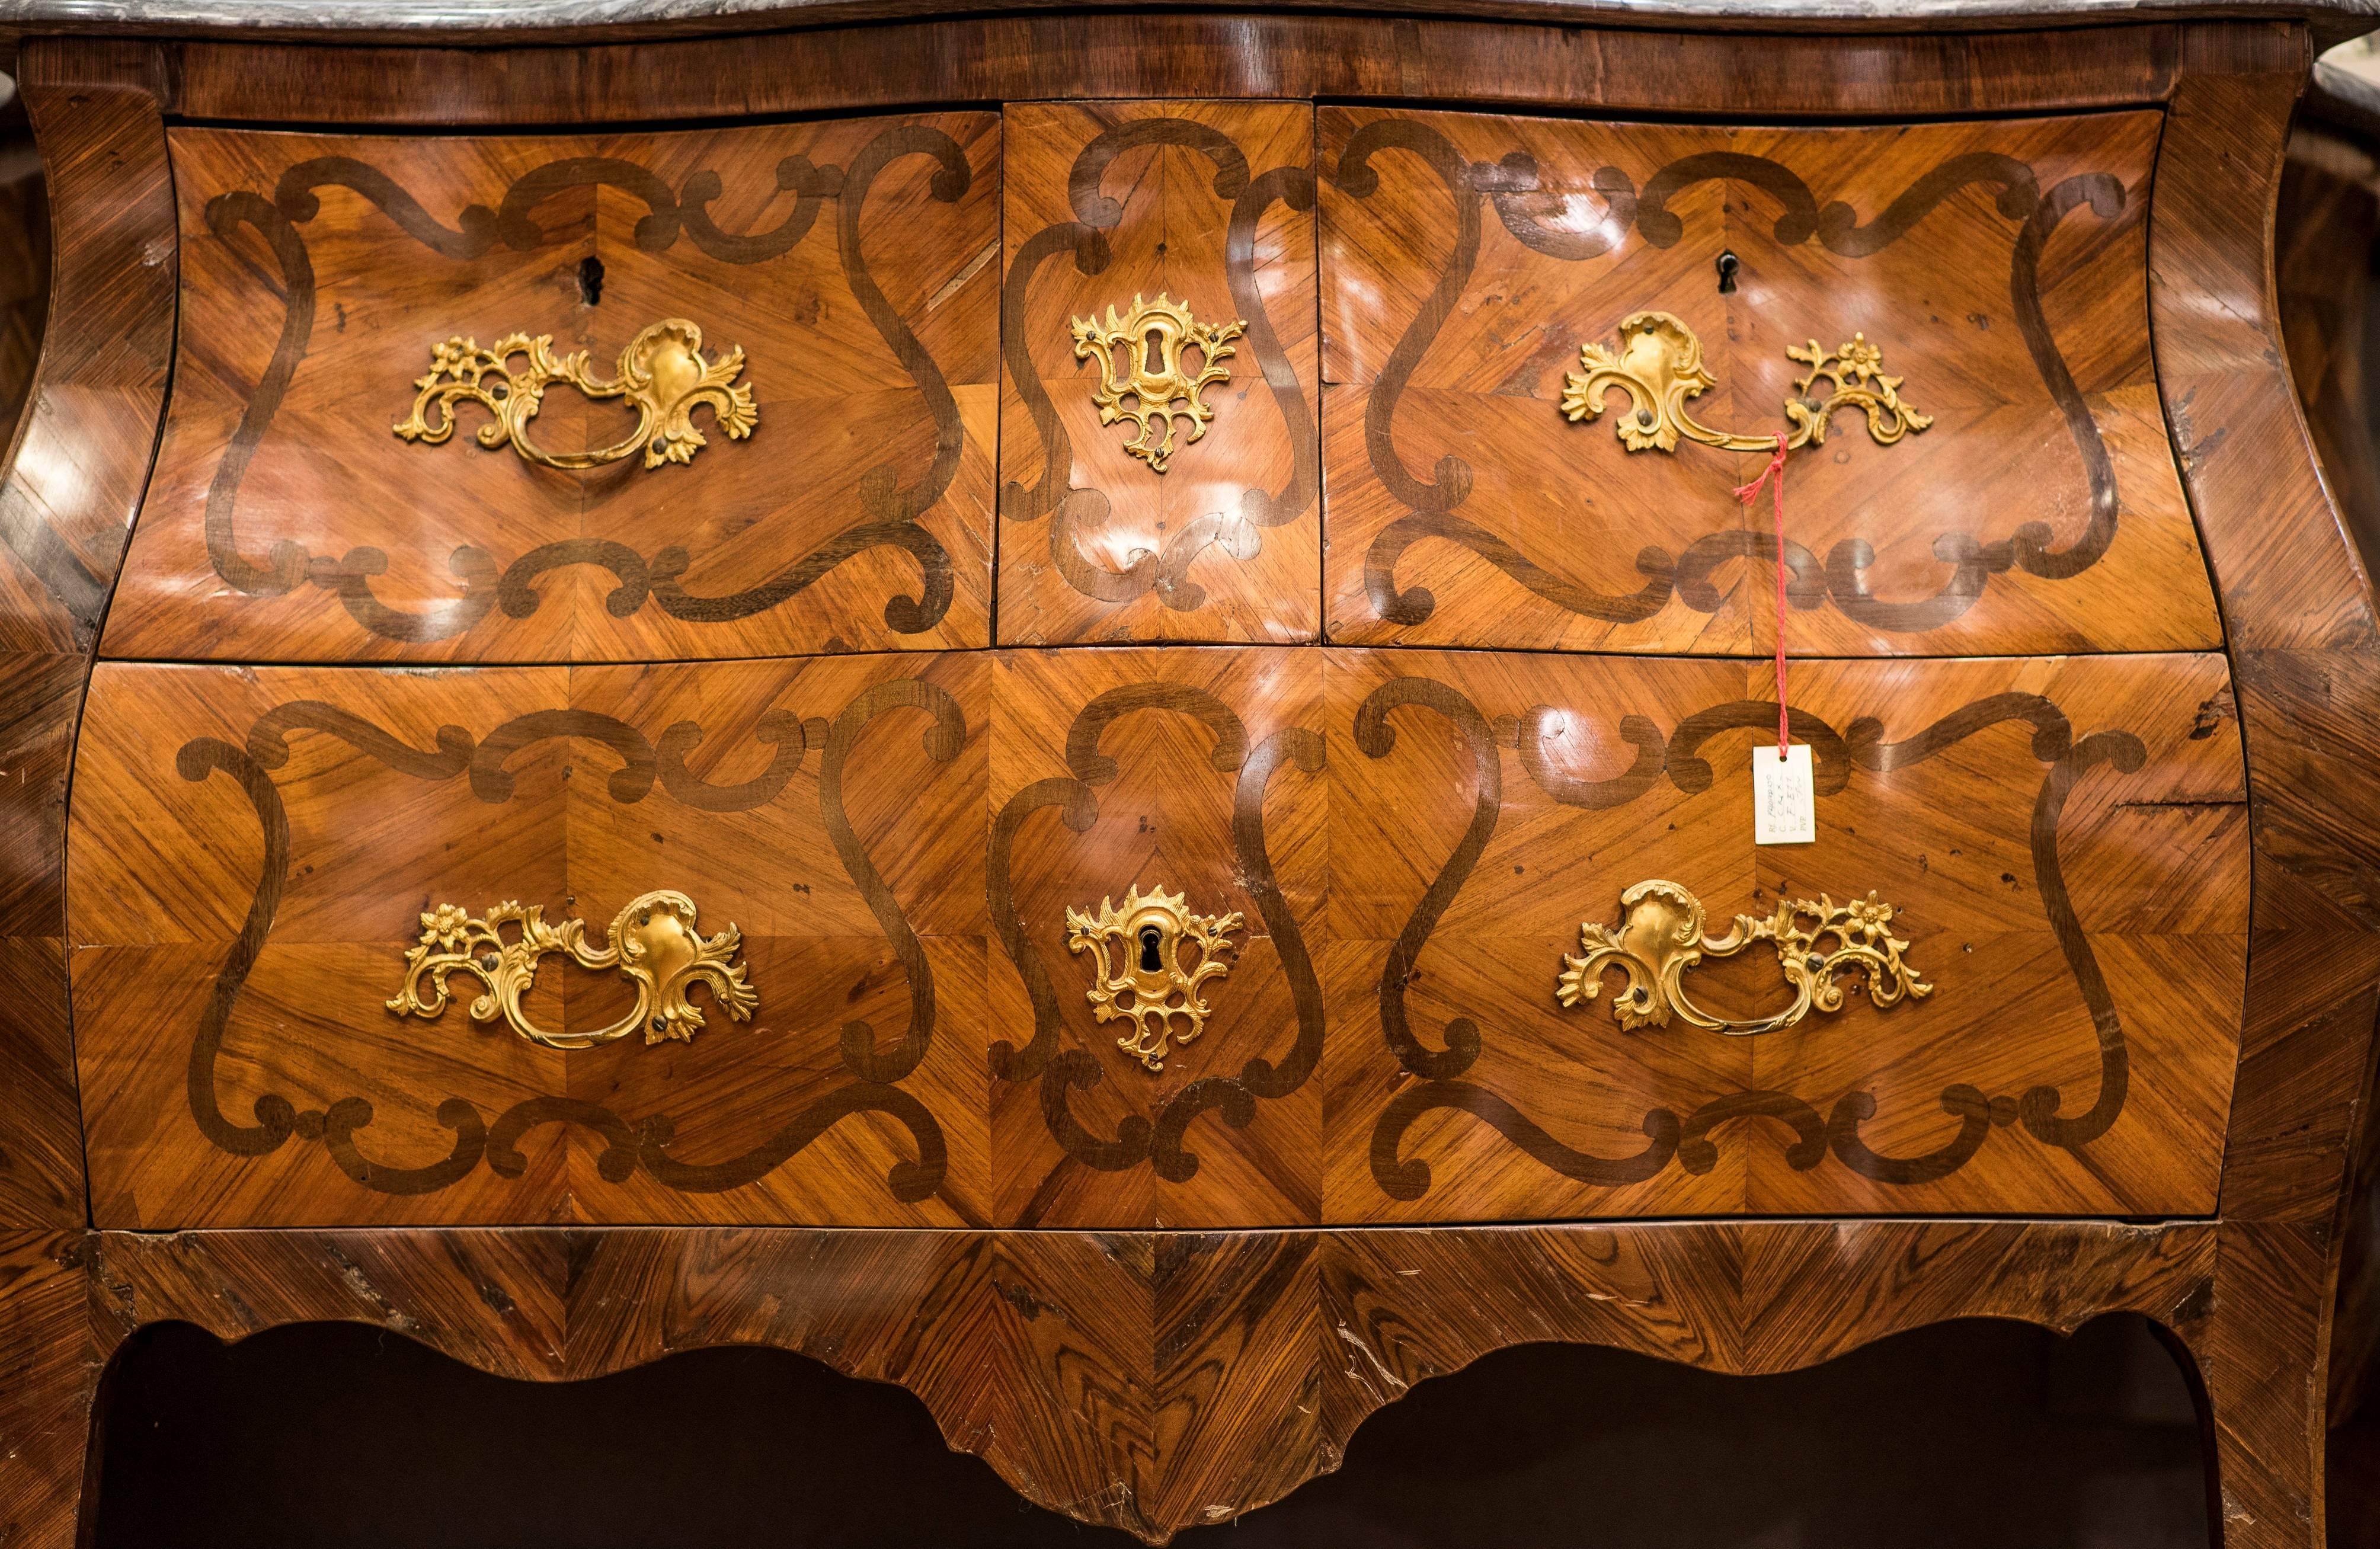 An 18th century French chest of drawers in mahogany, rosewood and walnut wood inlaid. With three chest of drawers and marble on the top. Shooters and keypads in golden bronze (ormolu).
 